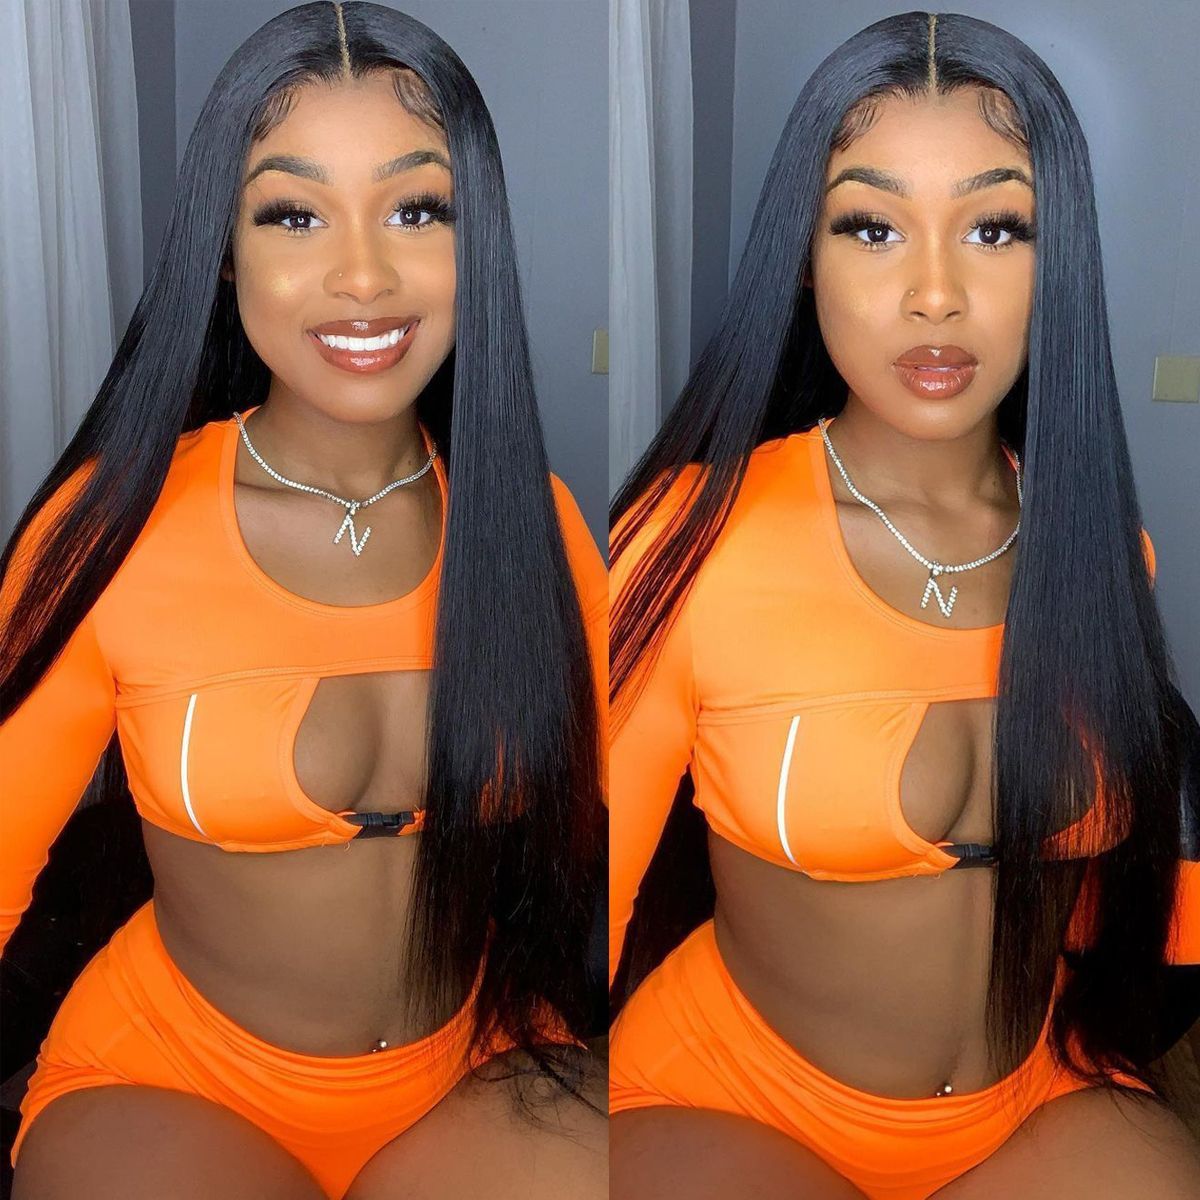 what is the difference Betweez Lace front wig and Full lace wig